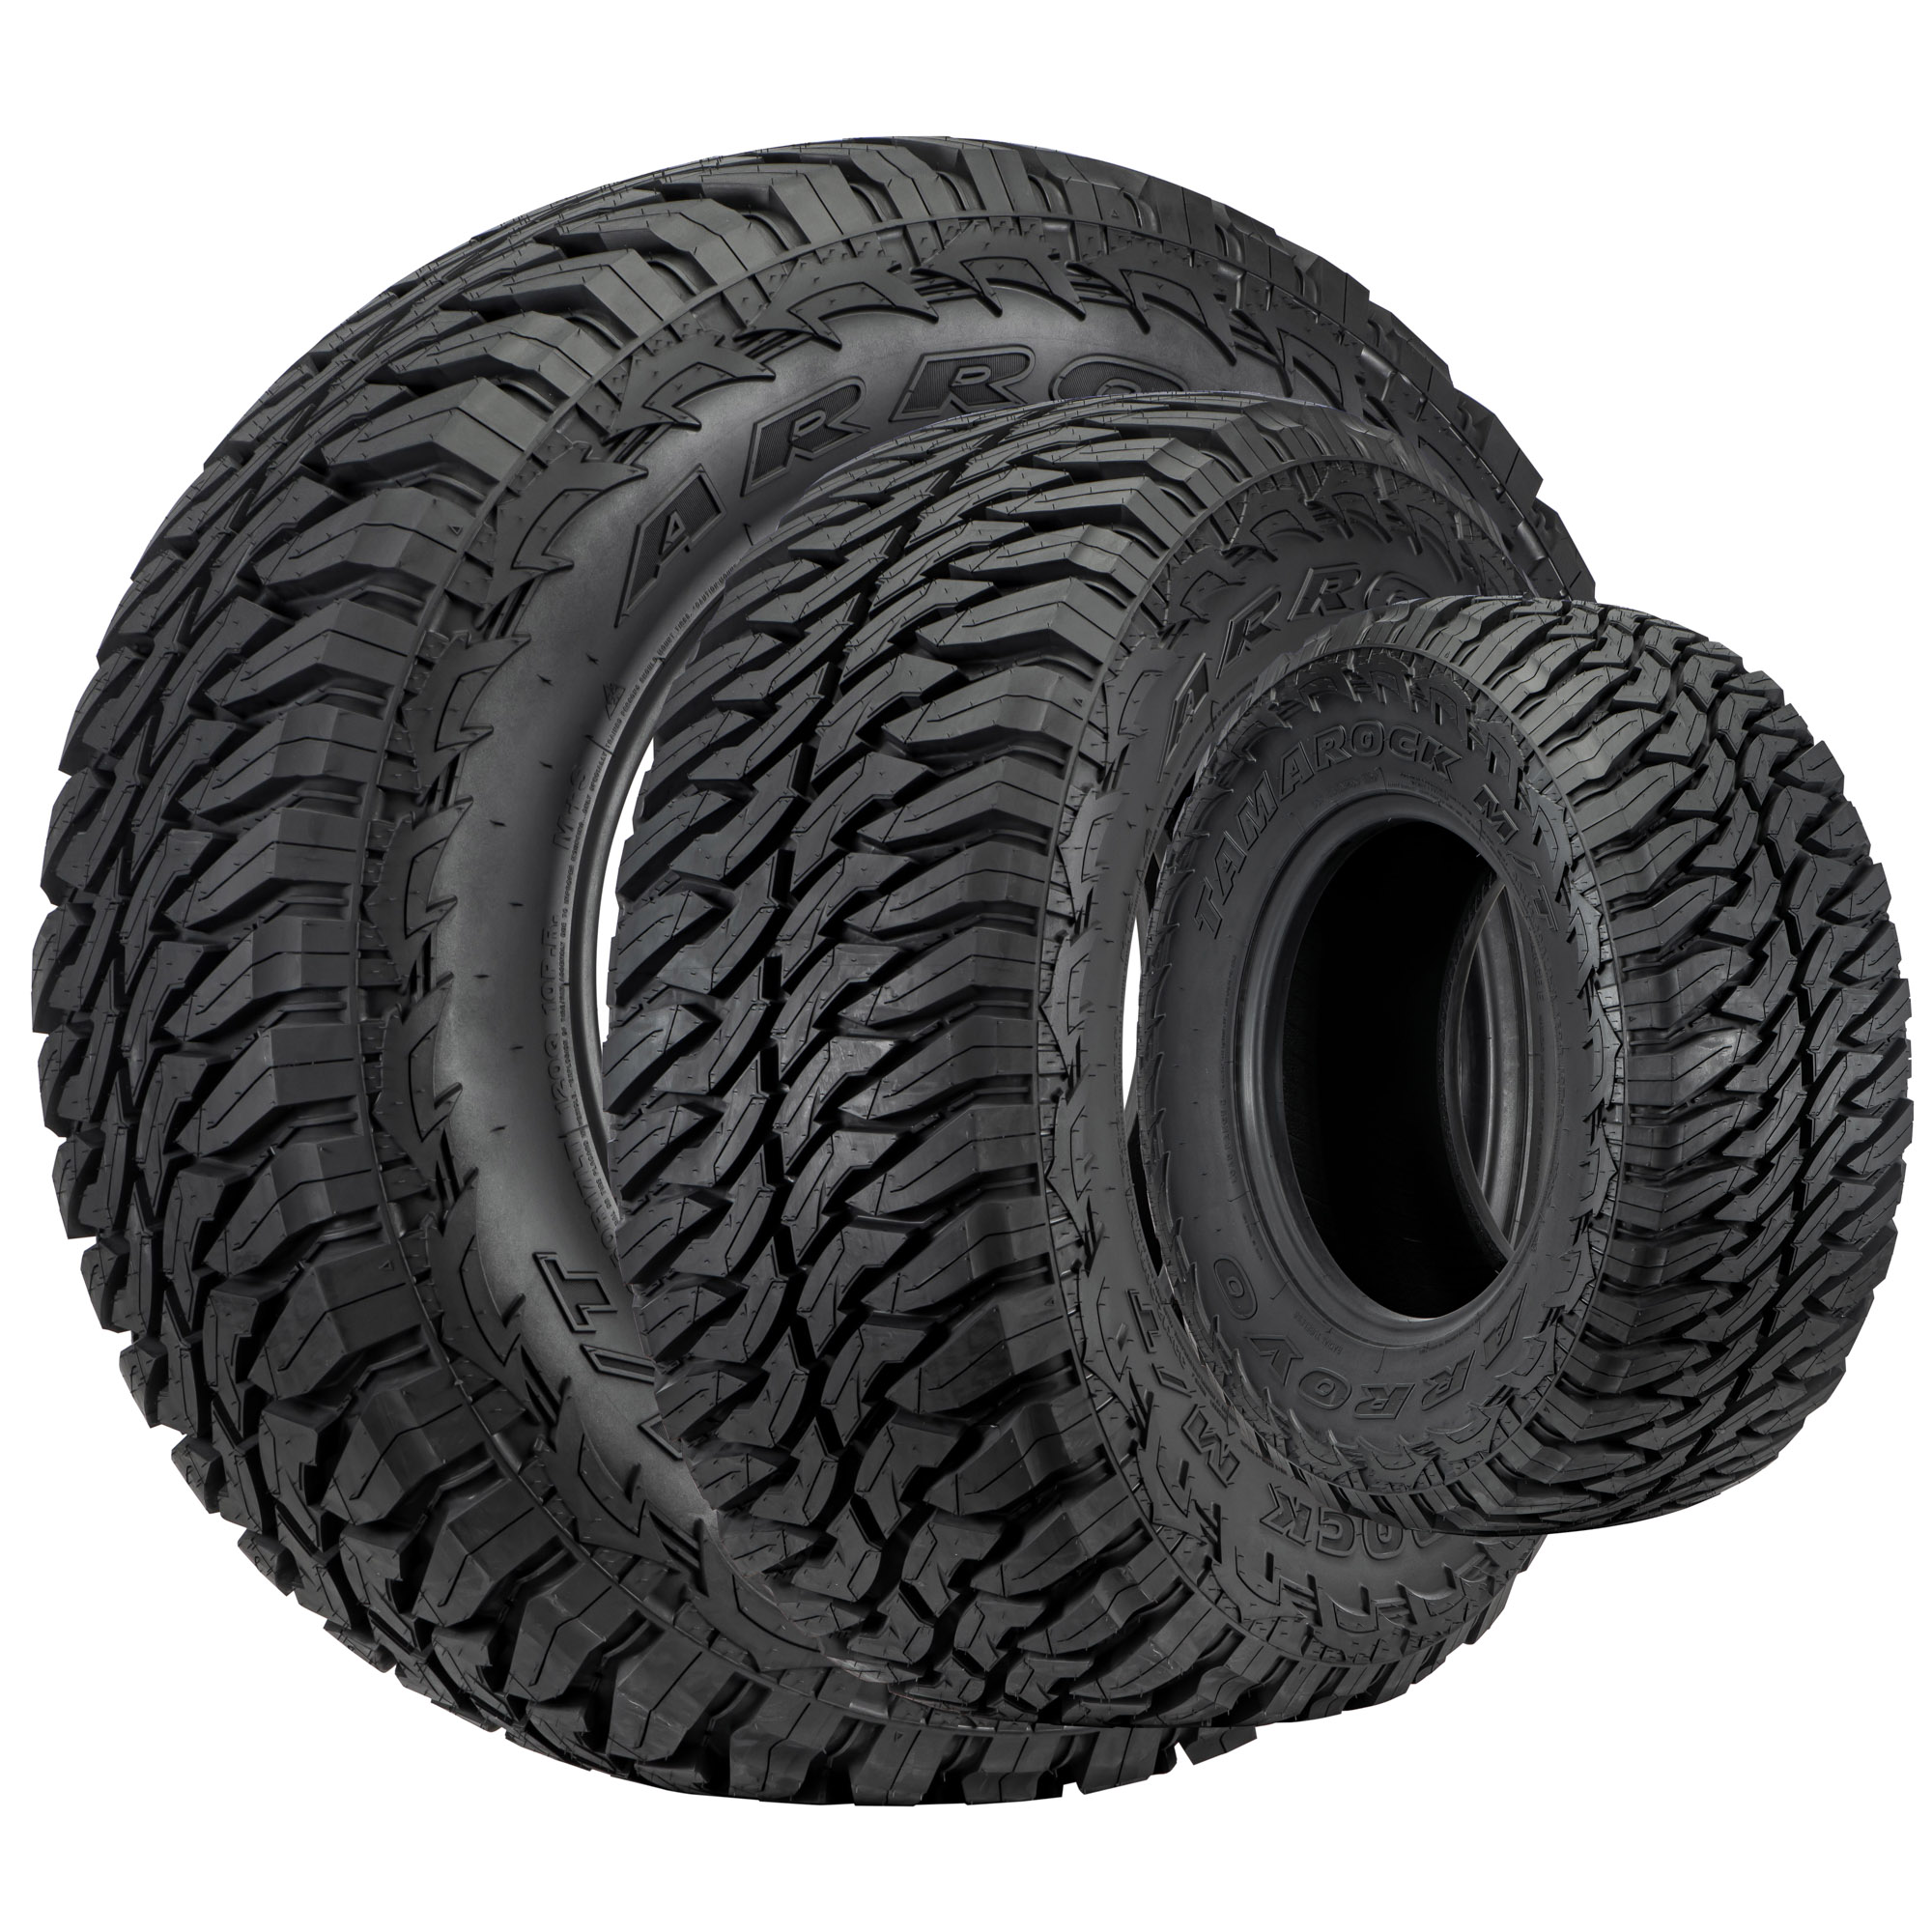 High Quality Product Photography or a stack of tires with treads tire photography studio los angeles ca expozme